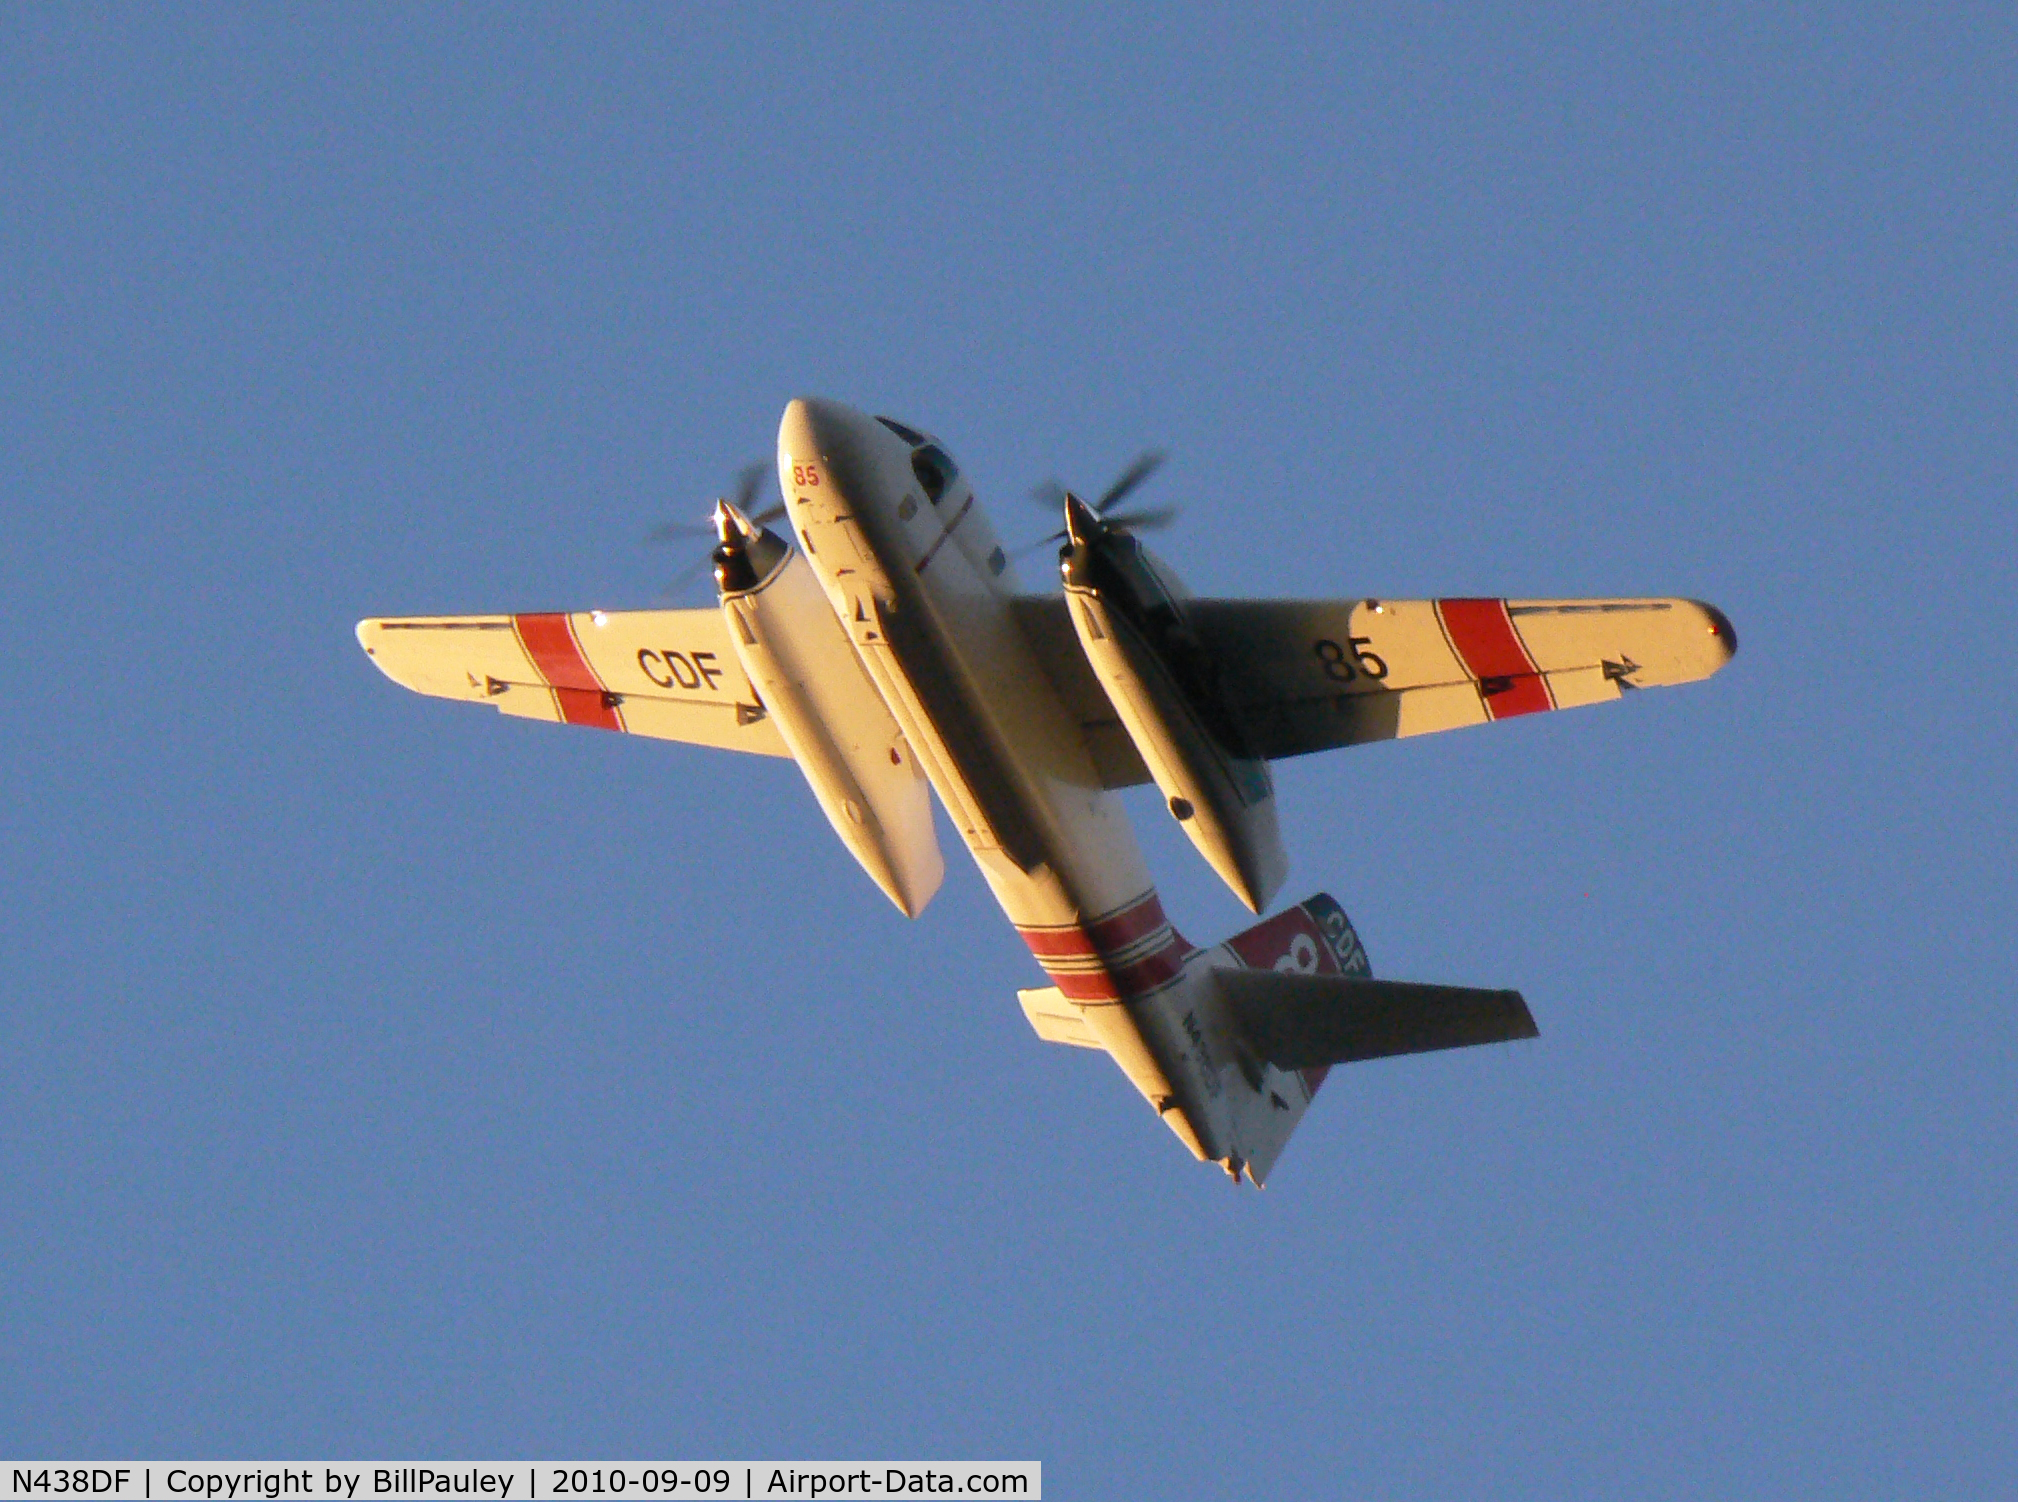 N438DF, Marsh Aviation S-2F3AT C/N 151640, One of two CALFIRE S-2F3AT tanker circling over San Bruno, CA, site of massive natural gas pipeline explosion.  CALFIRE's Bell EH-1 N495DF also on site as a Cal Fire OV-10 Bronco coordinated drops.